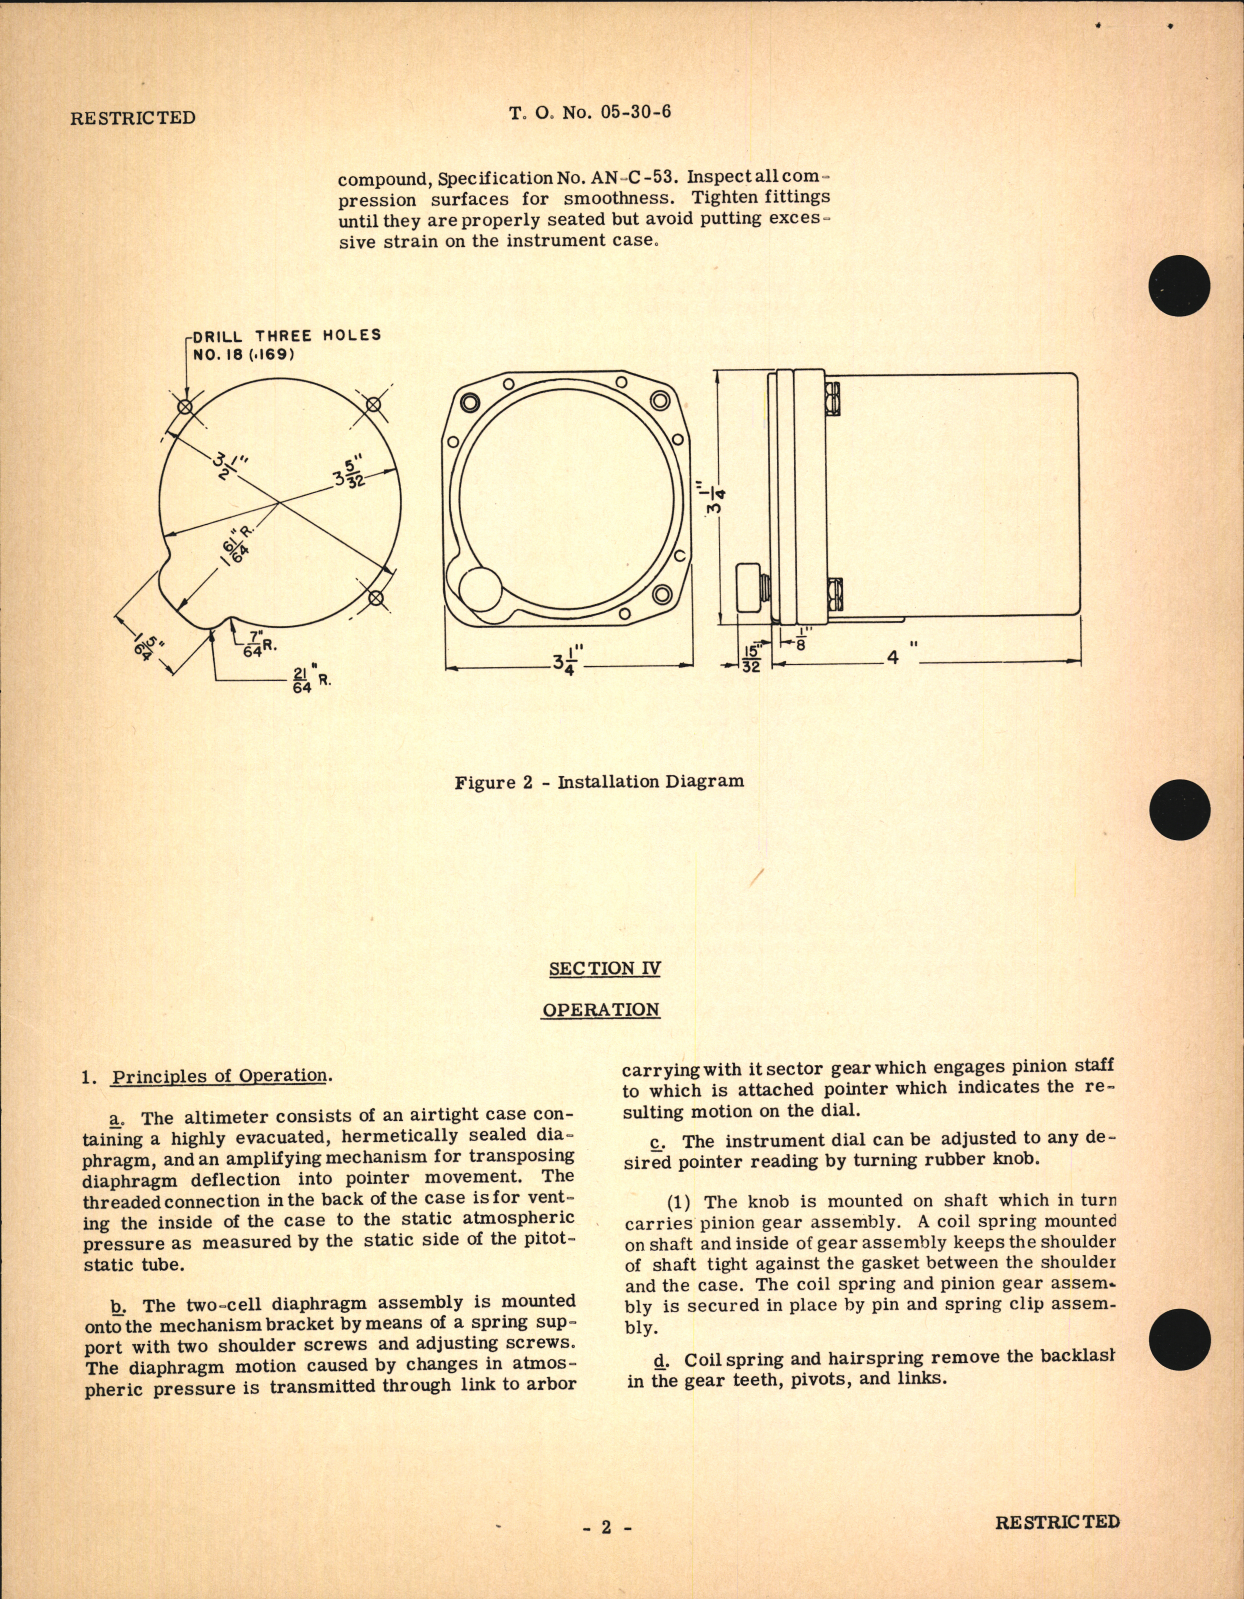 Sample page 6 from AirCorps Library document: Handbook of Instructions with Parts Catalog for Type B-12 Altimeter